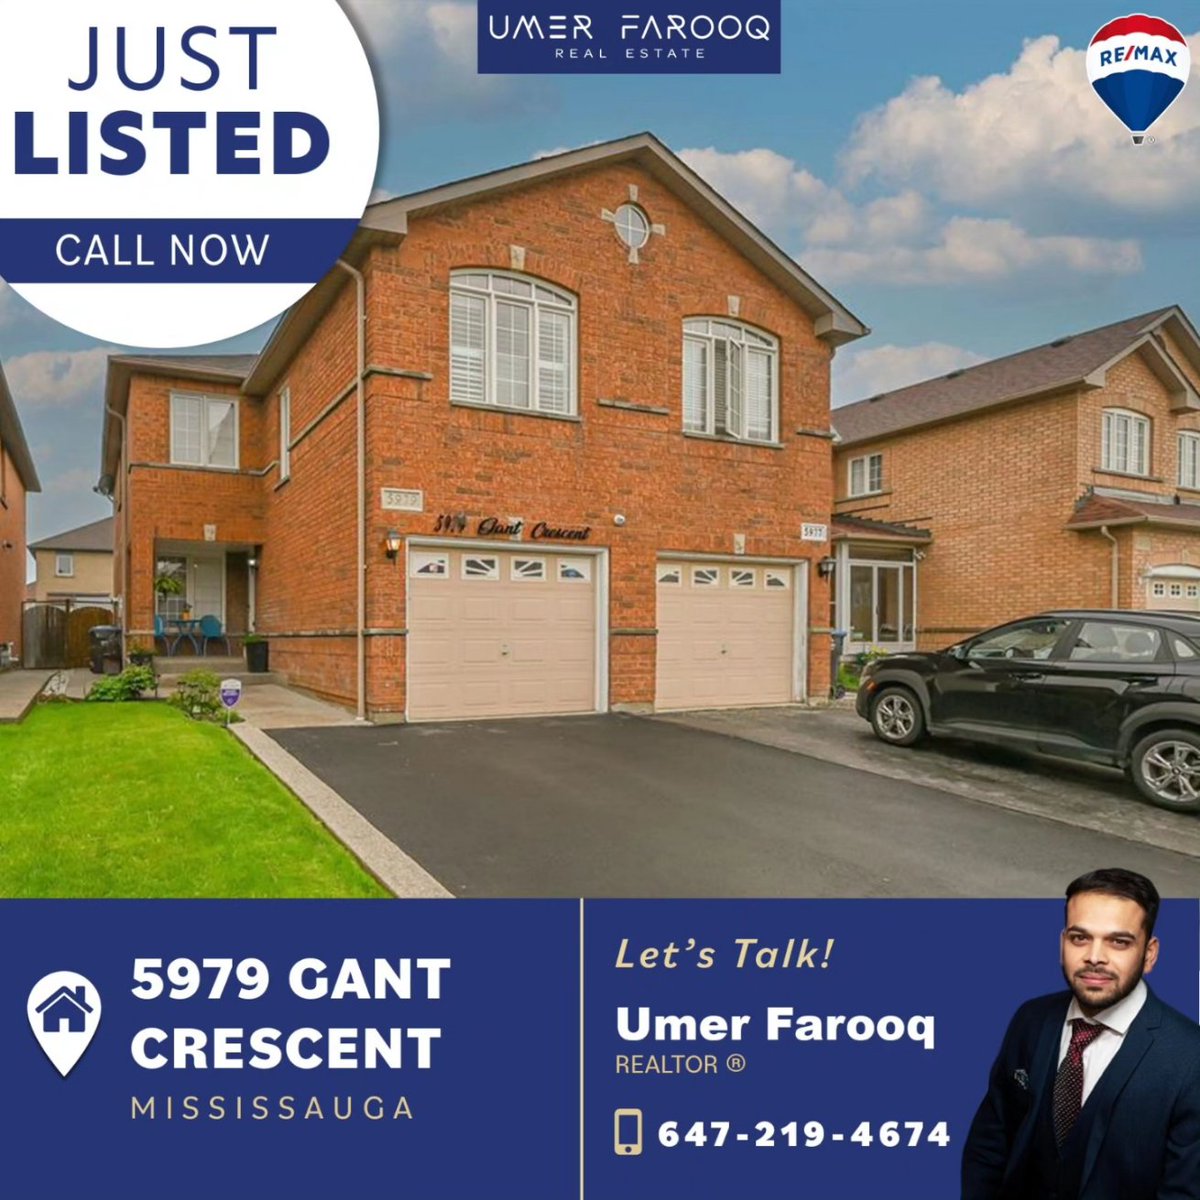 ❗ JUST LISTED ❗️ 

📍Gant Cres, Mississauga

Interested in knowing more about this property? Get touch!

📱 647.219.4674

 #GTA #GreaterTorontoAreat #mississauga #realtor #realtorlife #investmentproperty #canada  #toronto #gtarealty #mississaugarealtor #Buy #sell #semidetached